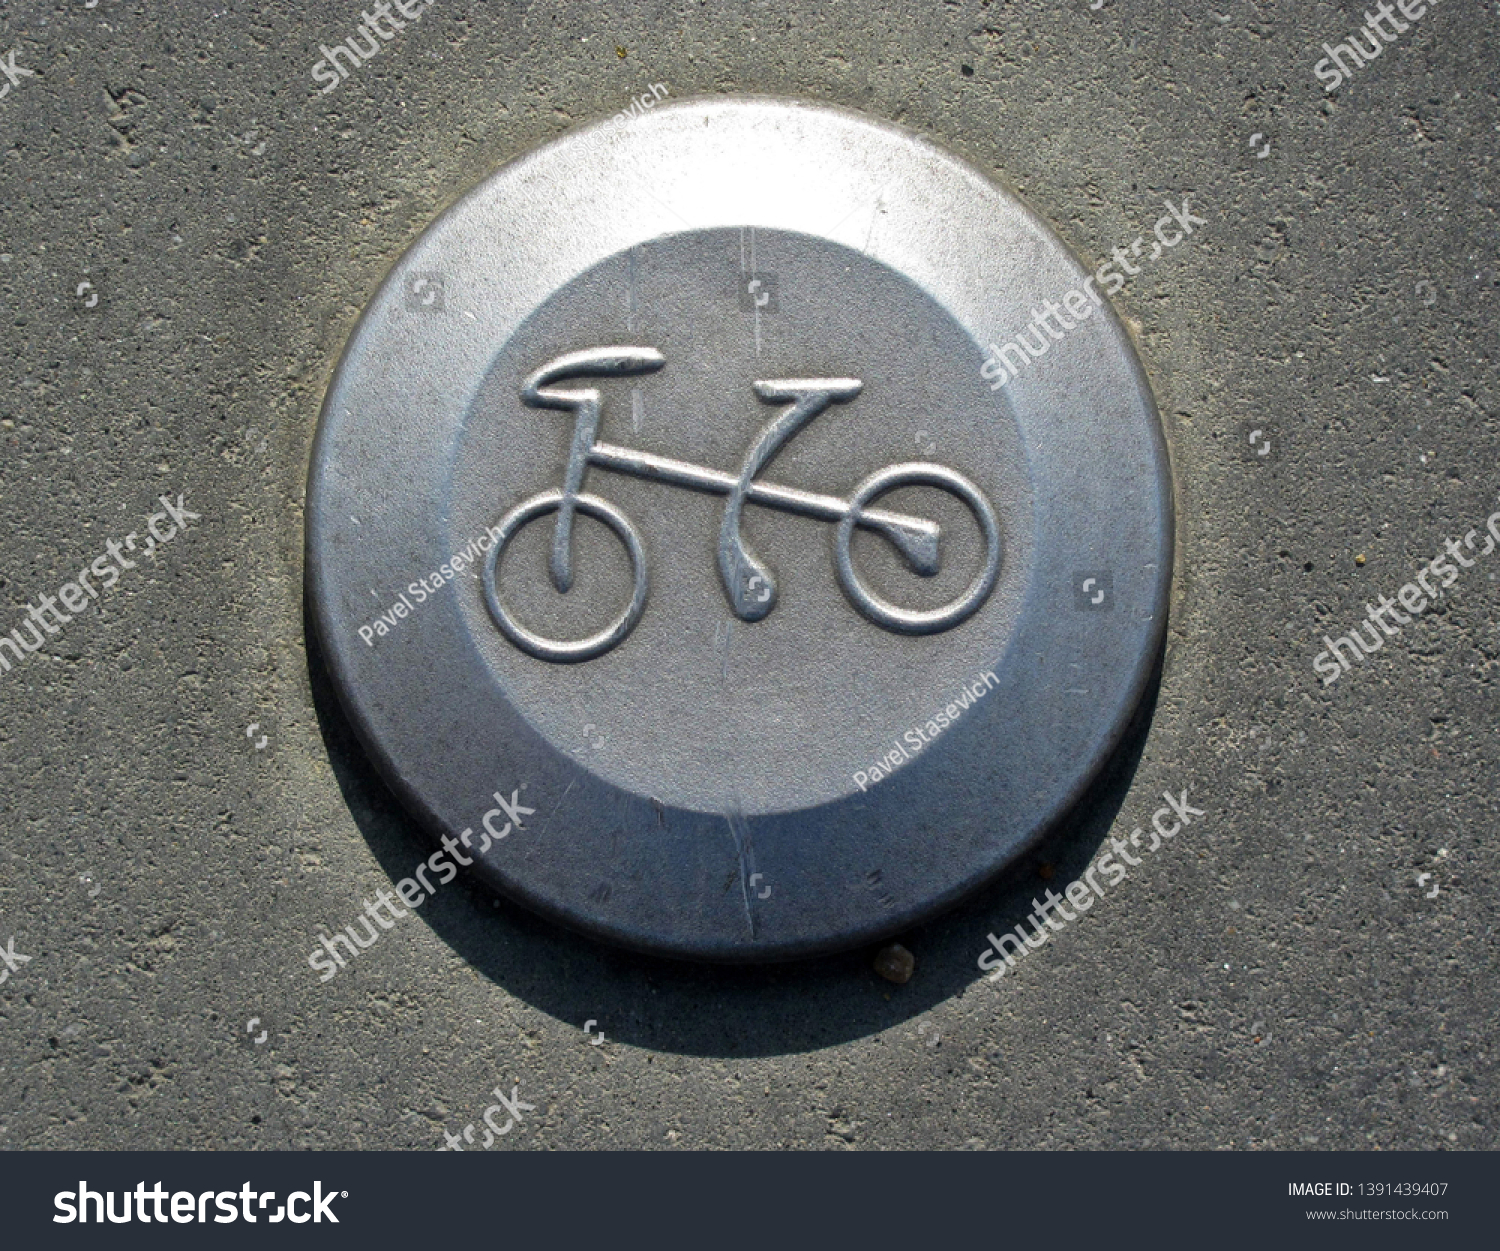 Bicycle pictogram on a bicycle track. Traffic, object. #1391439407